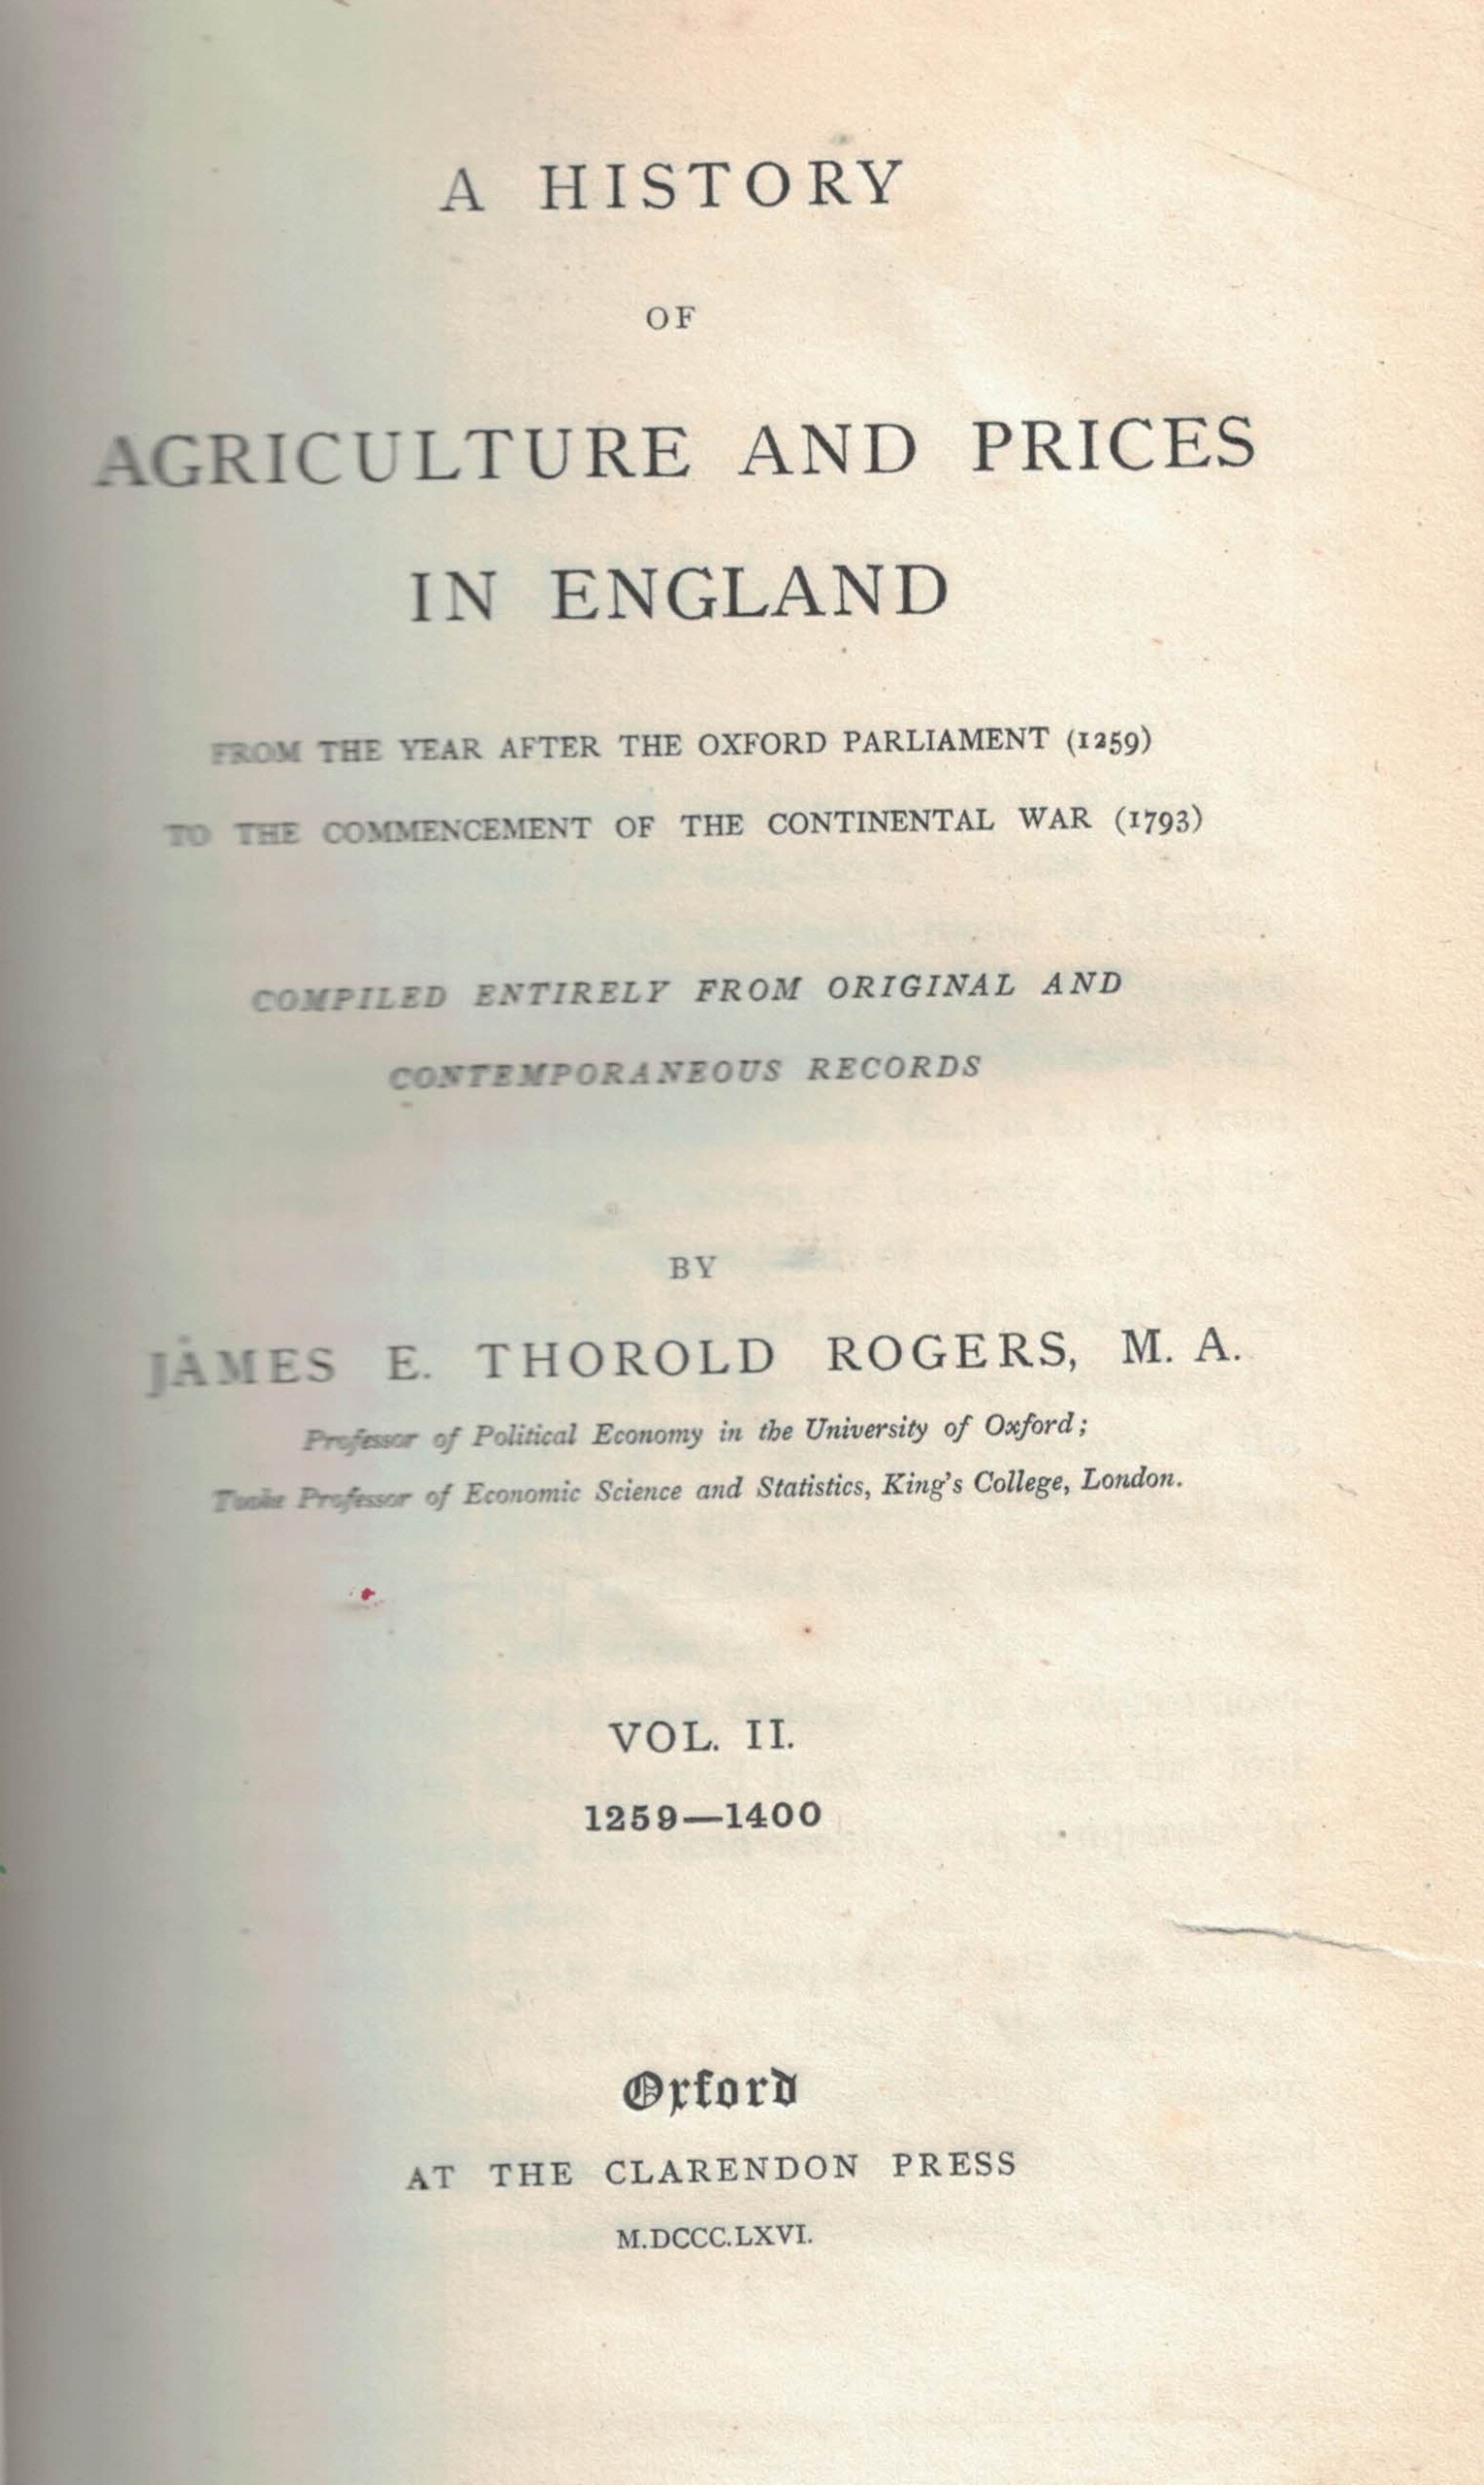 A History of Agriculture and Prices in England. From the Year After Oxford Parliament (1259) to the Commencement of the Continental War (1793), Compiled Entirely from Original and Contemporaneous Records. Two volume set.